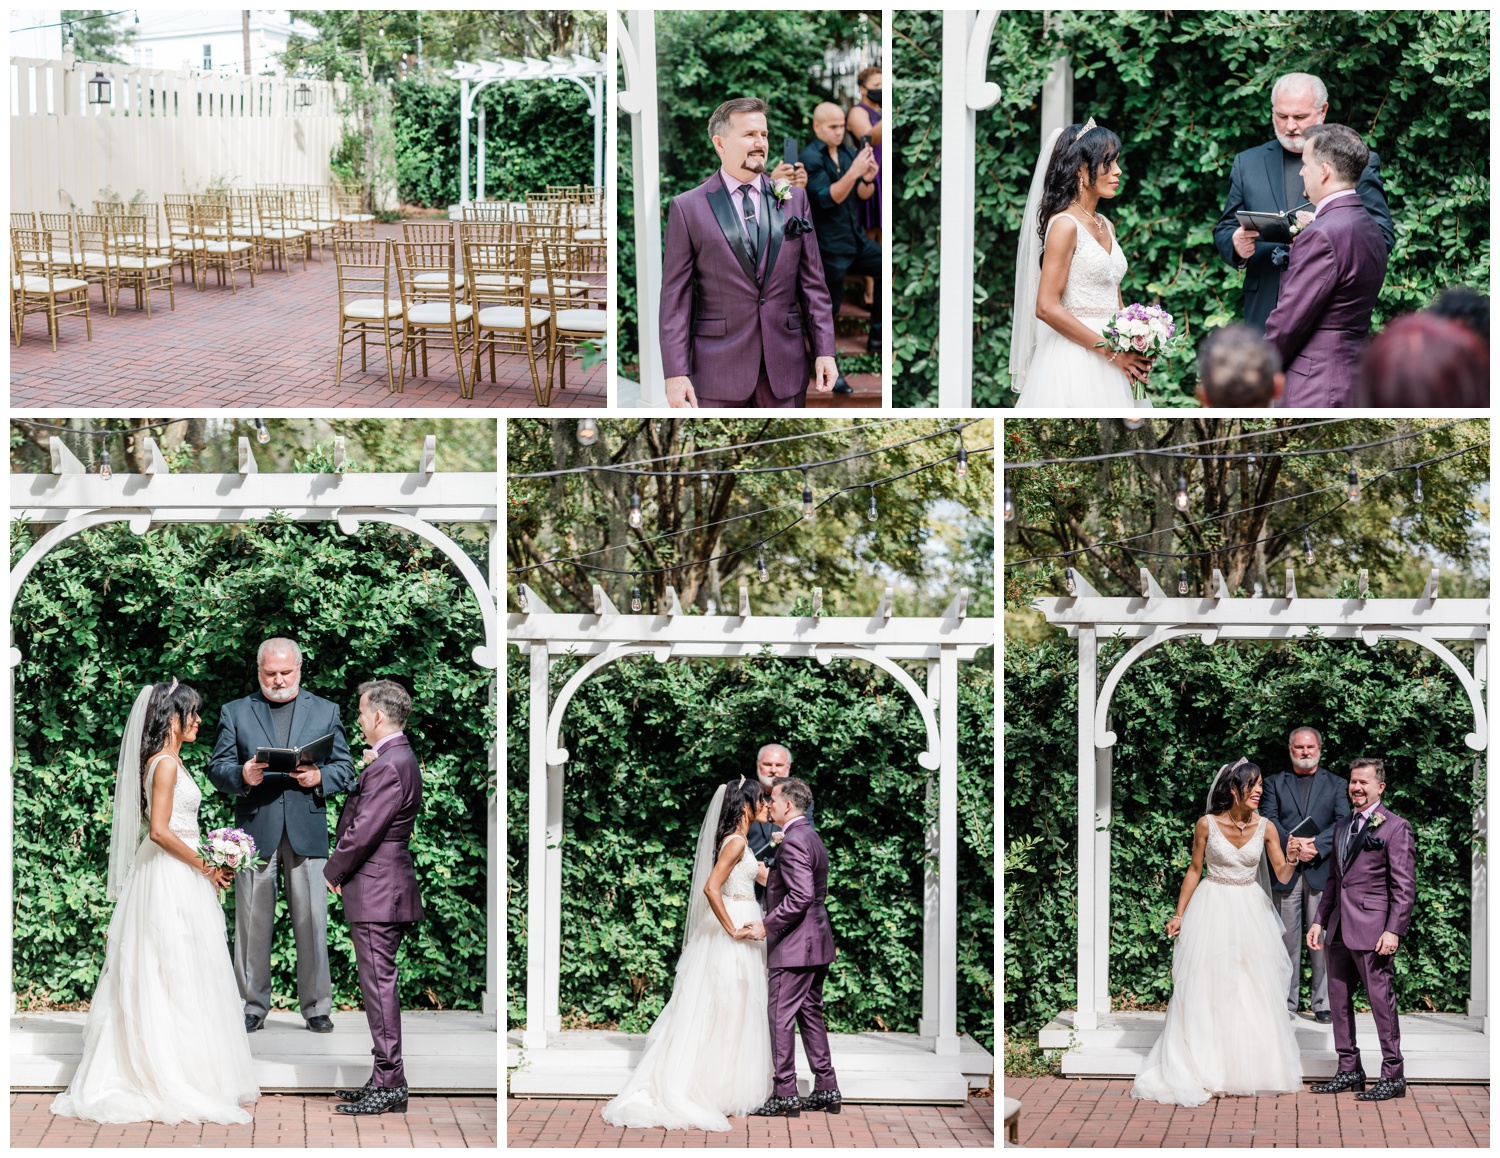 Savannah Elopement Package - ceremony at the Gingerbread House